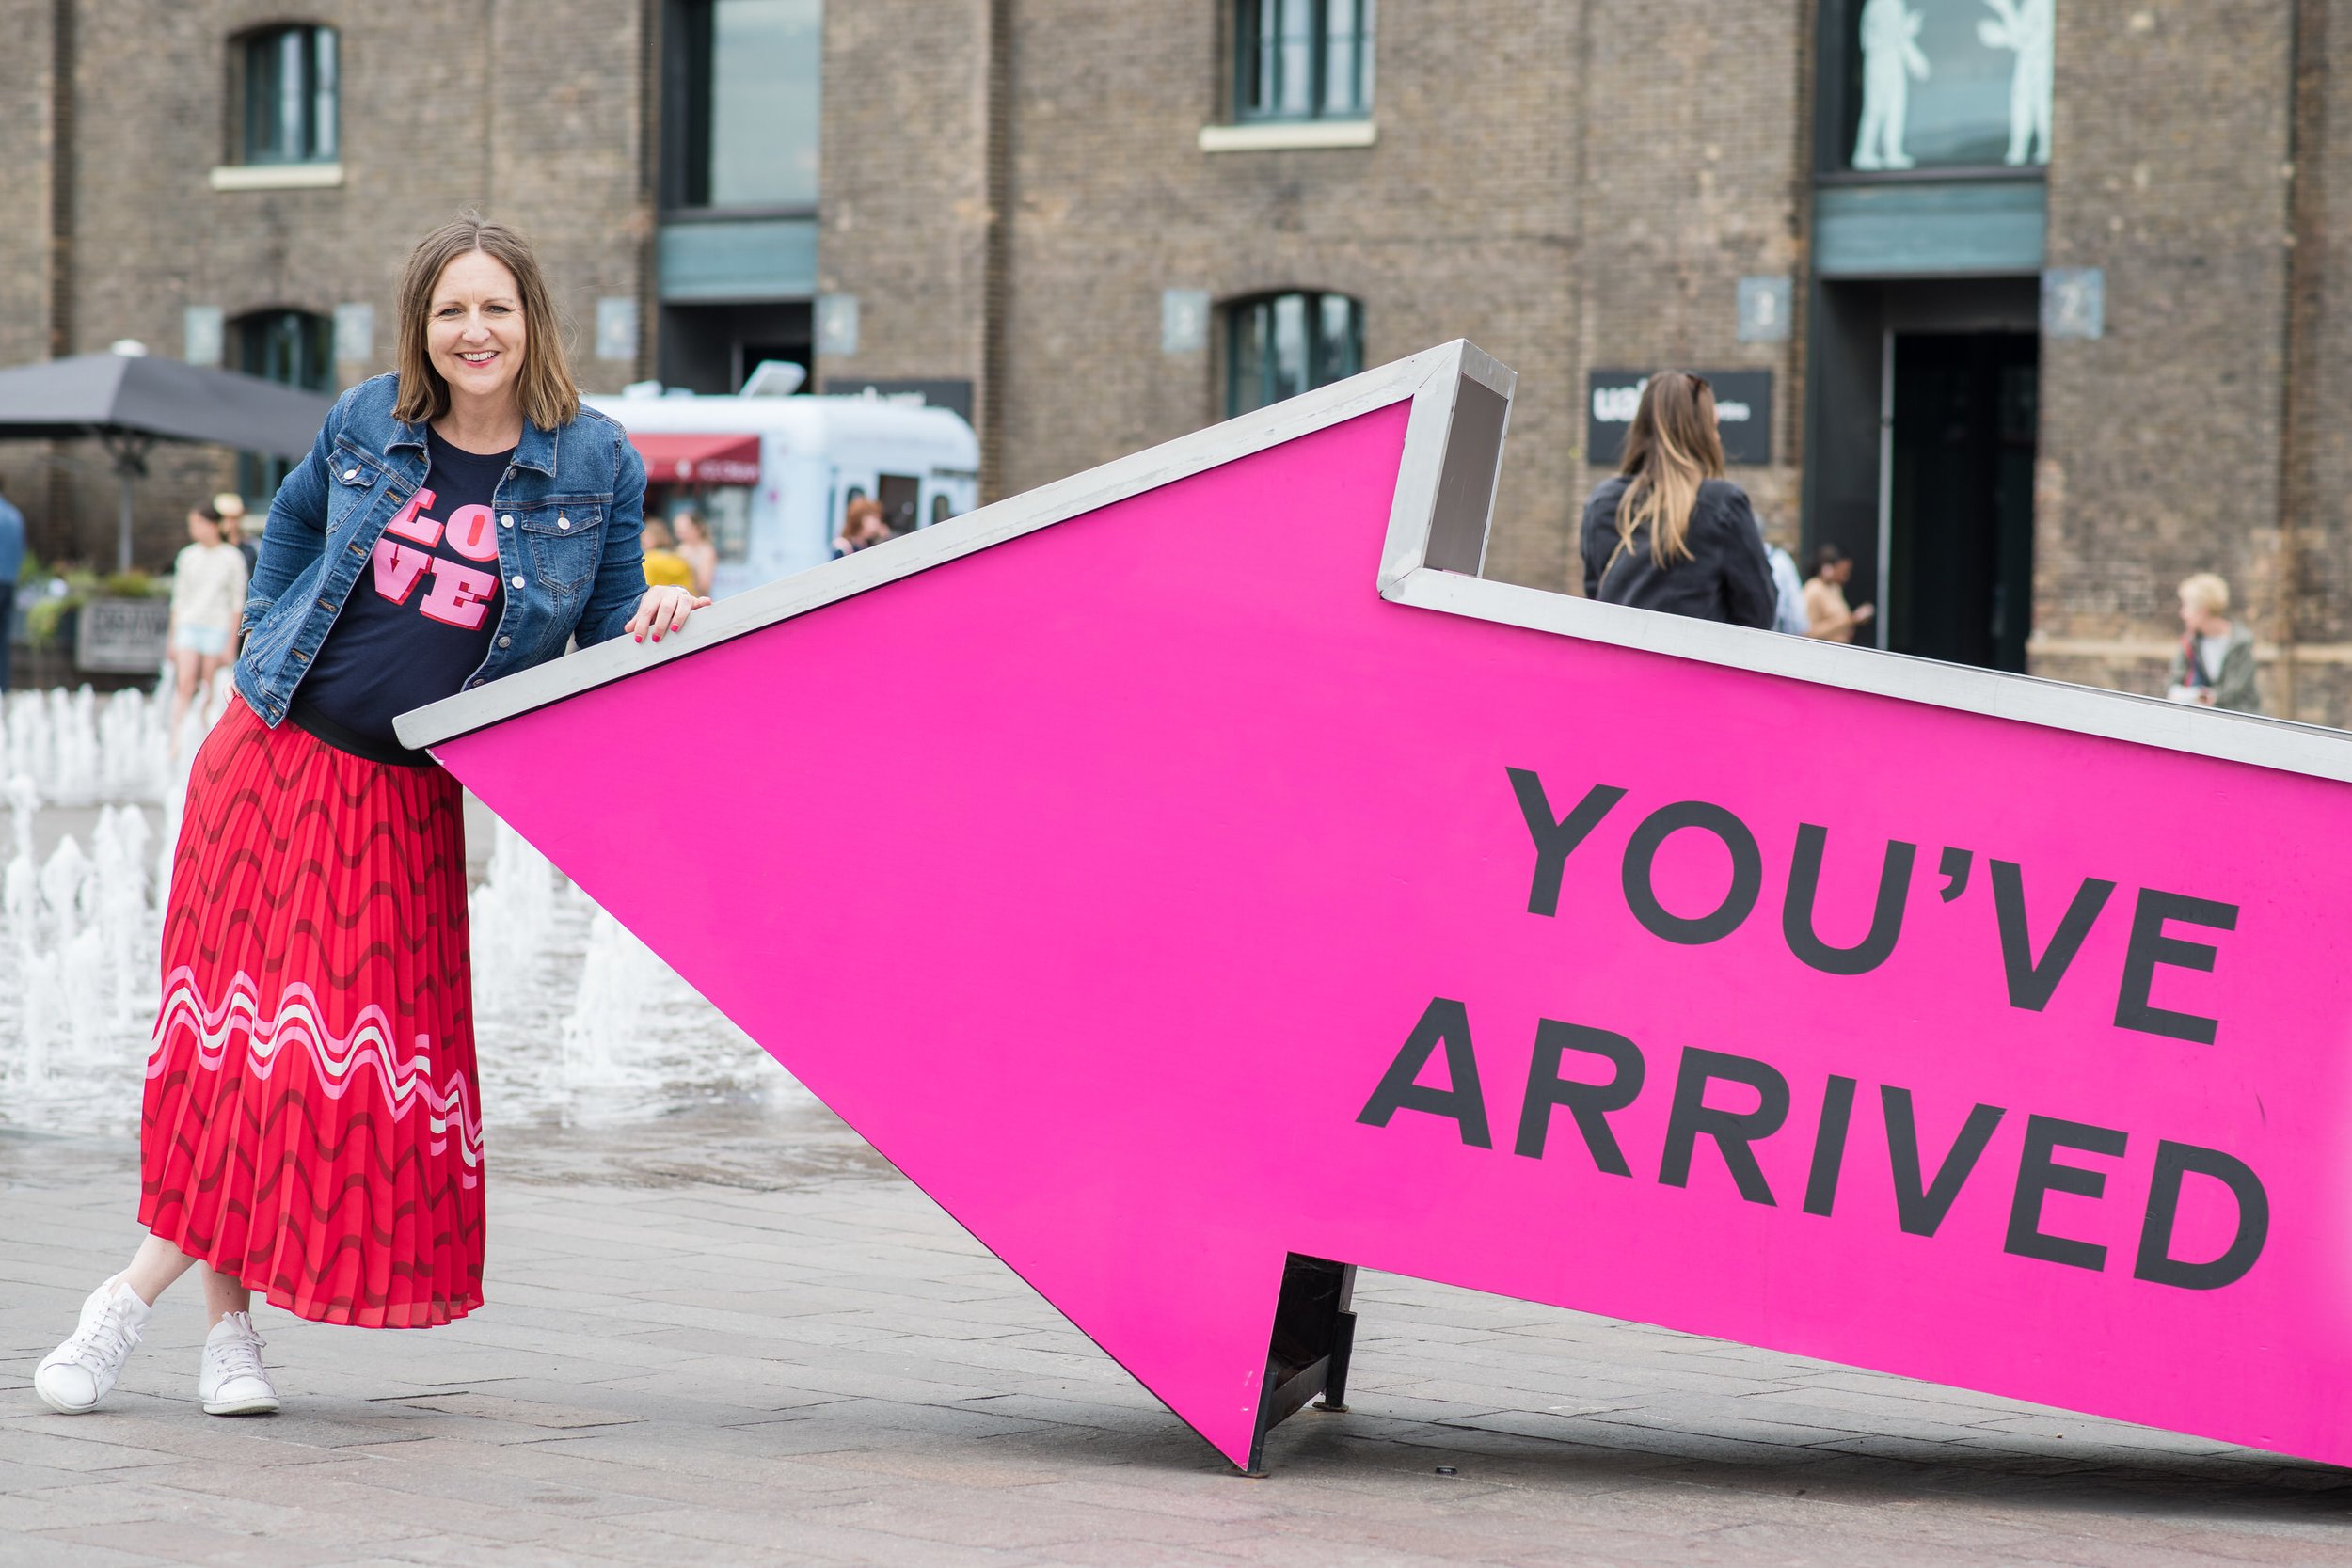  Business woman poses in front of large arrow with the words “you’ve arrived on it”  